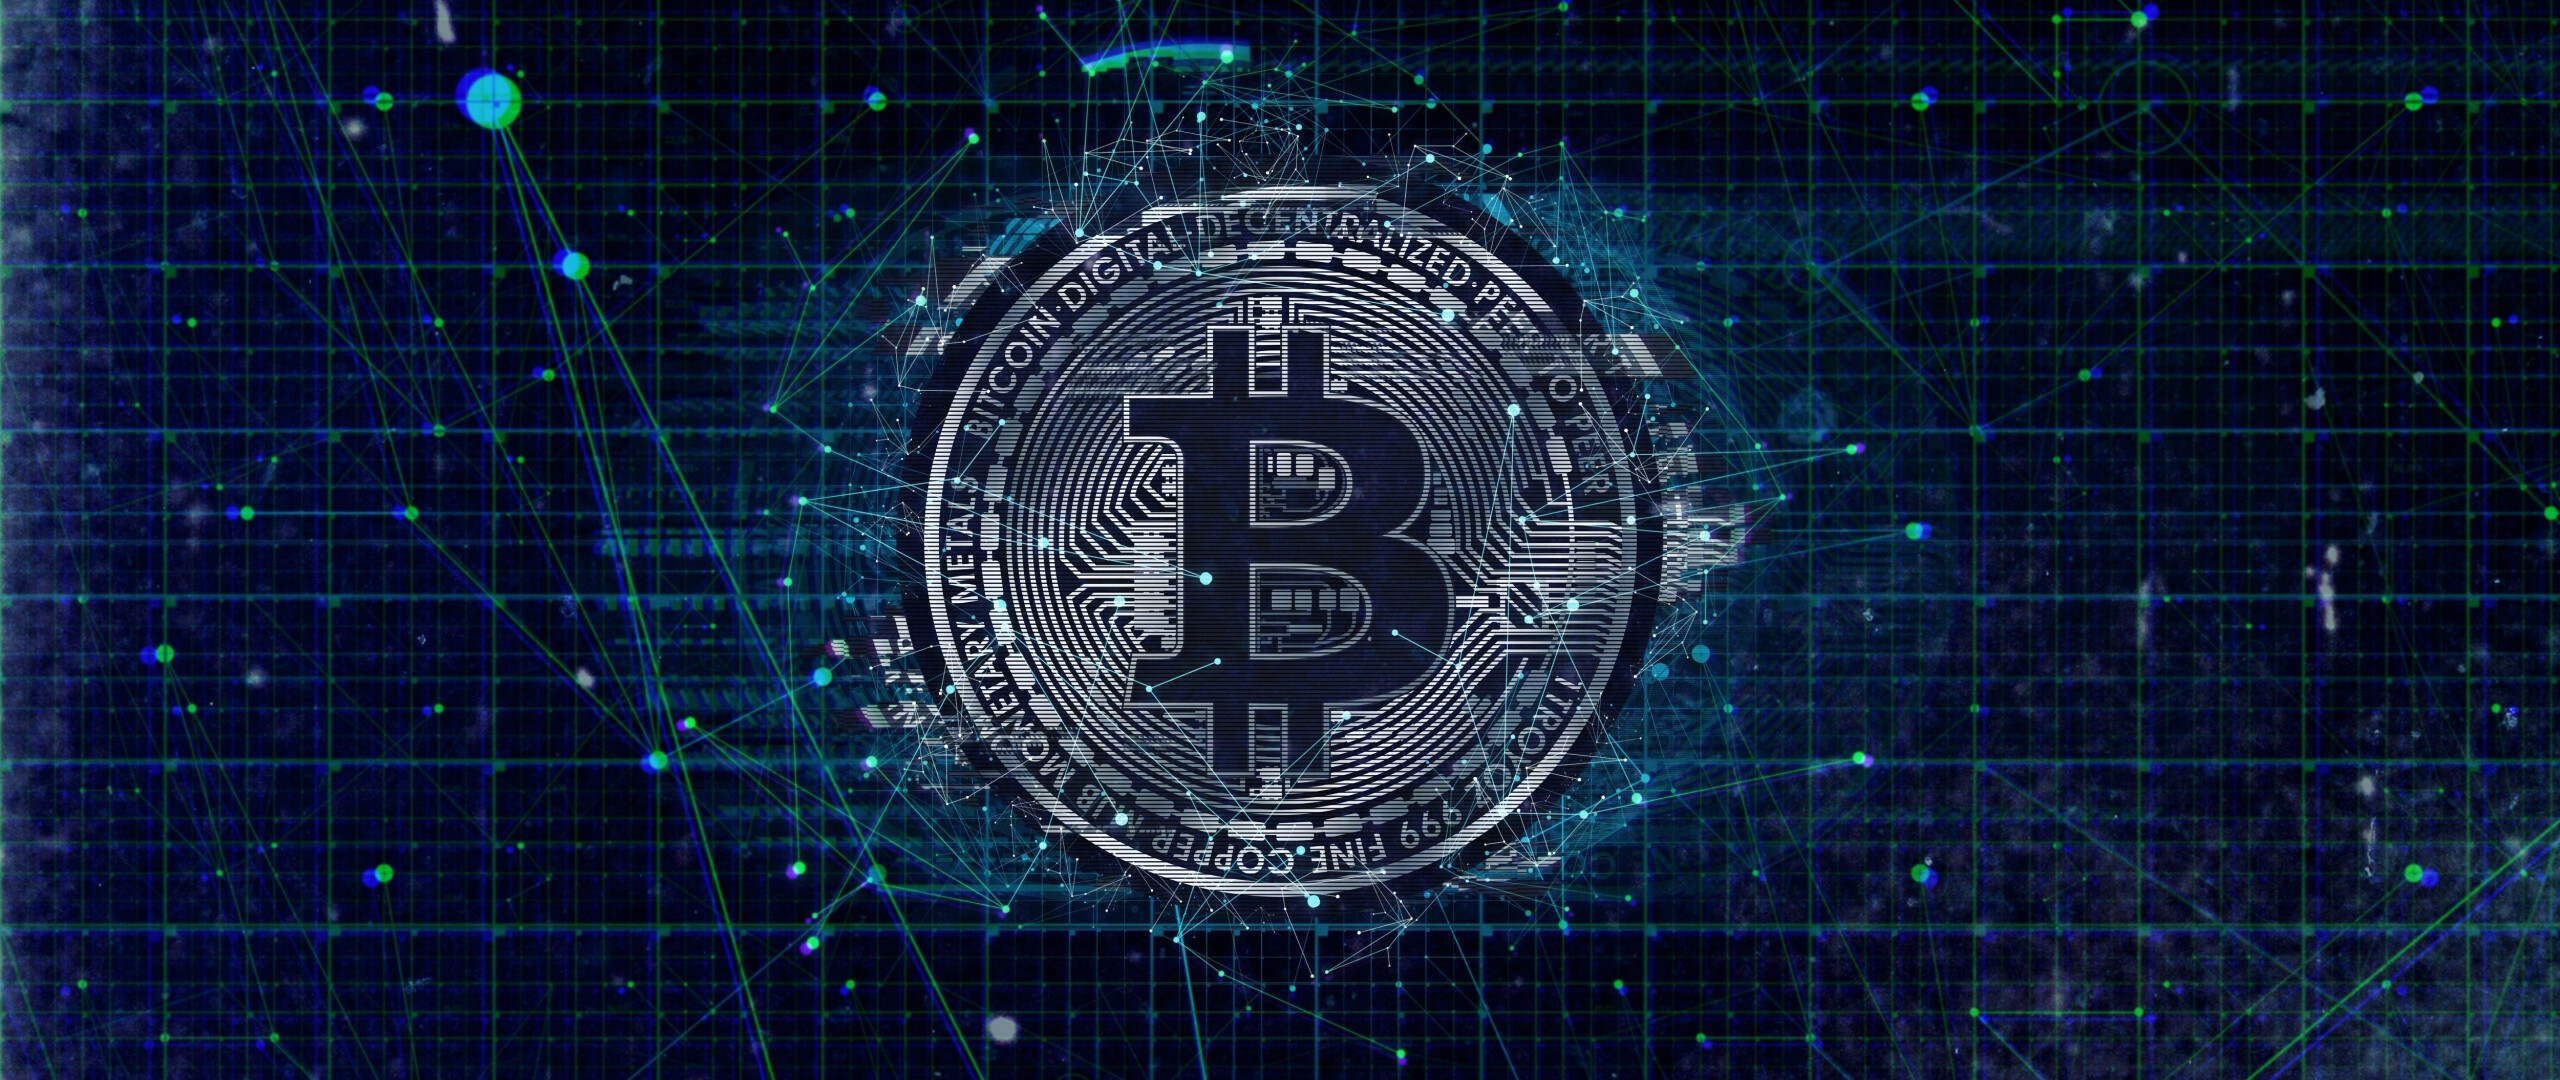 Bitcoin: Crypto, its price has increased considerably since its inception. 2560x1080 Dual Screen Wallpaper.